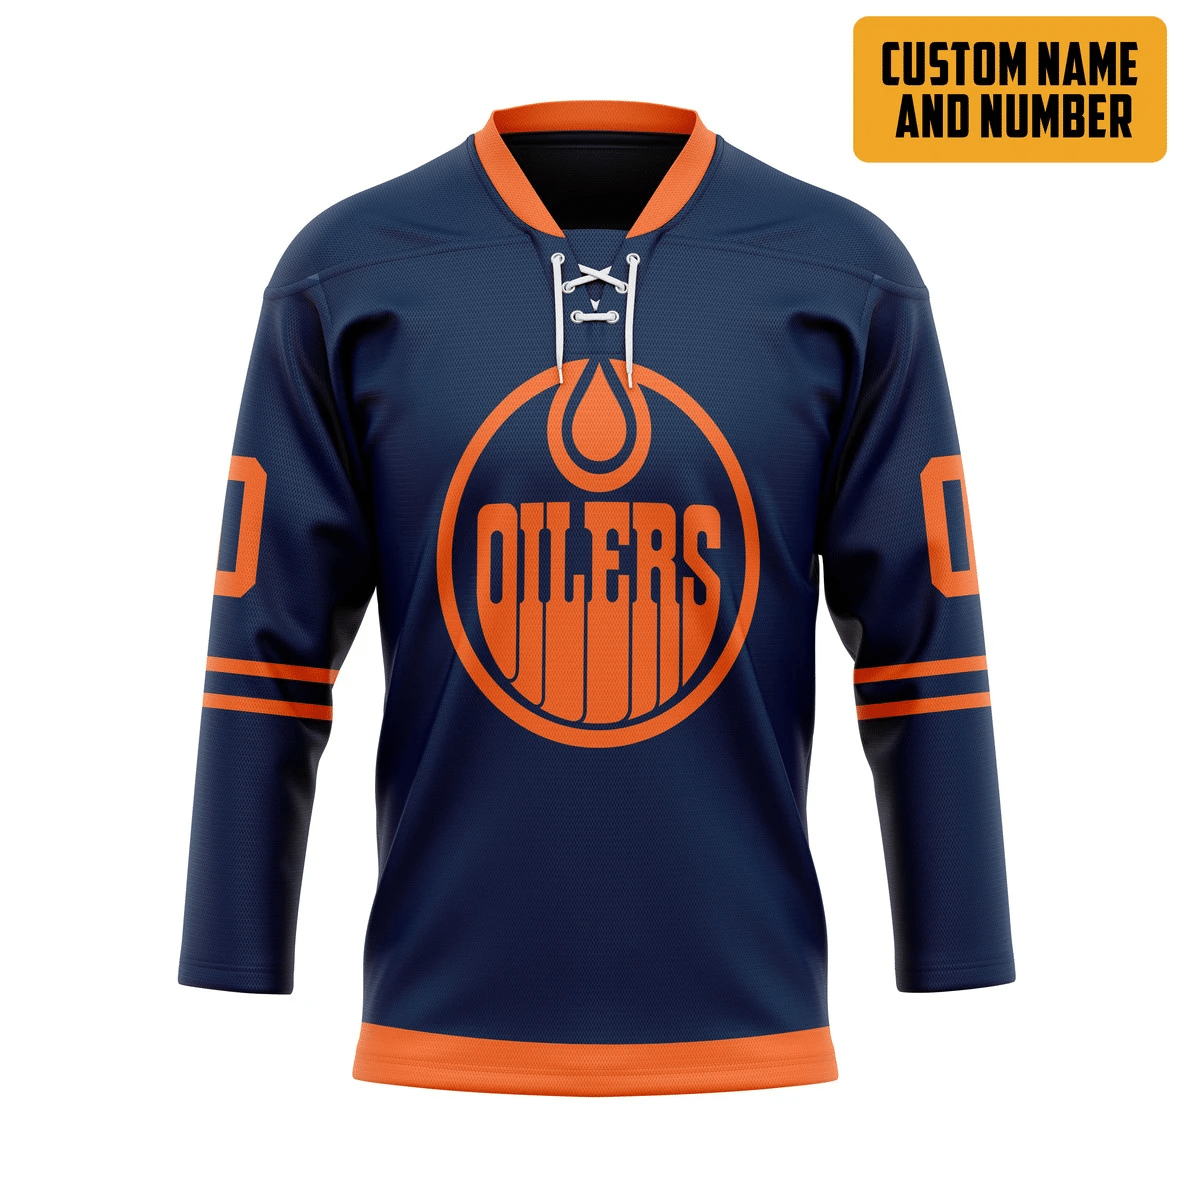 Top cool Hockey jersey for fan You can buy online. 4